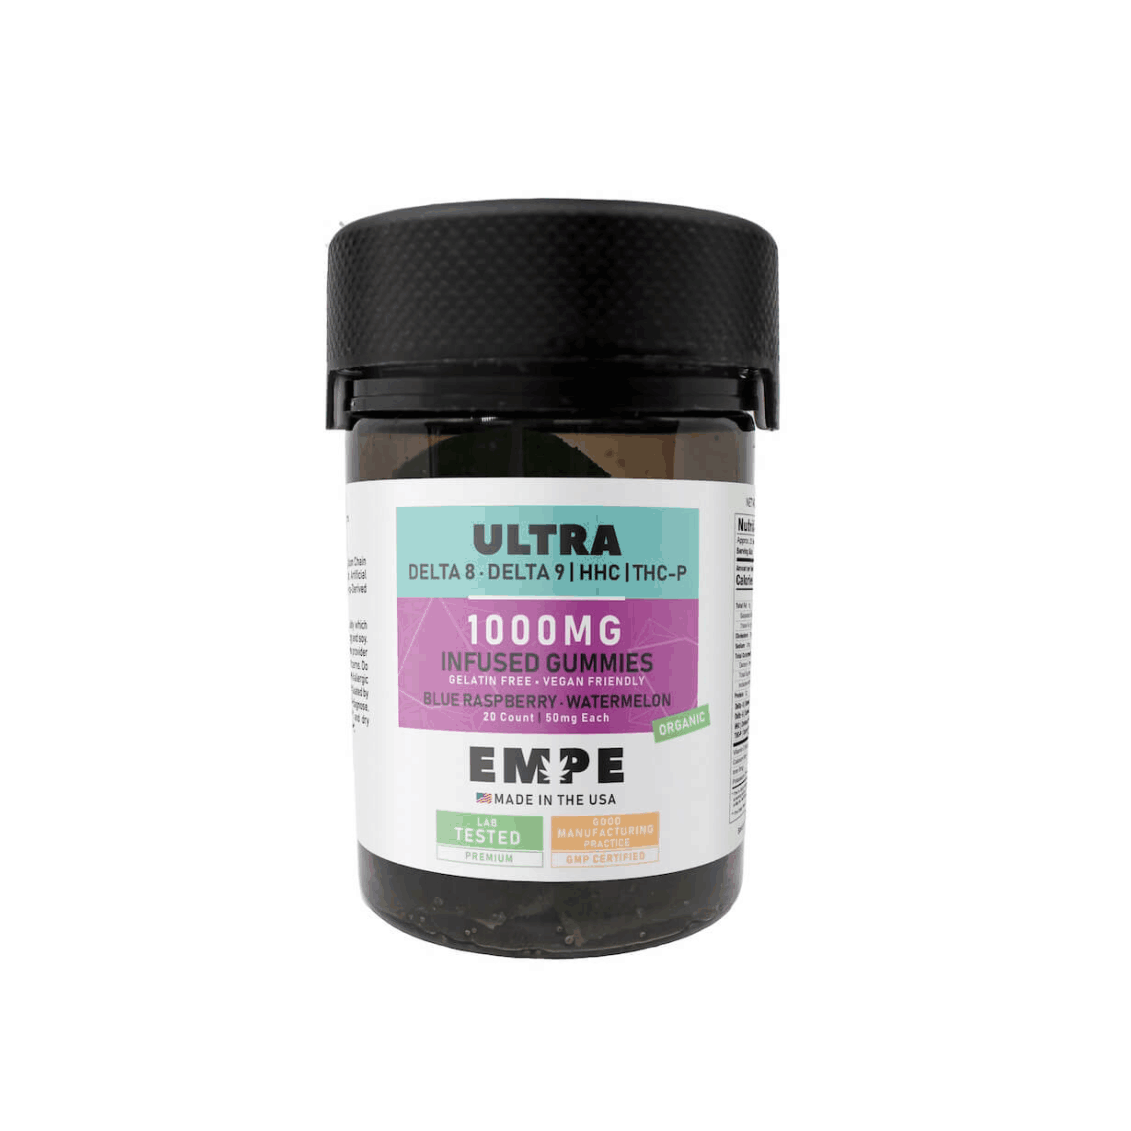 Delta-9 Gummies By Empe-USA-Comprehensive Review Exploring the Top Delta-9 THC Gummies